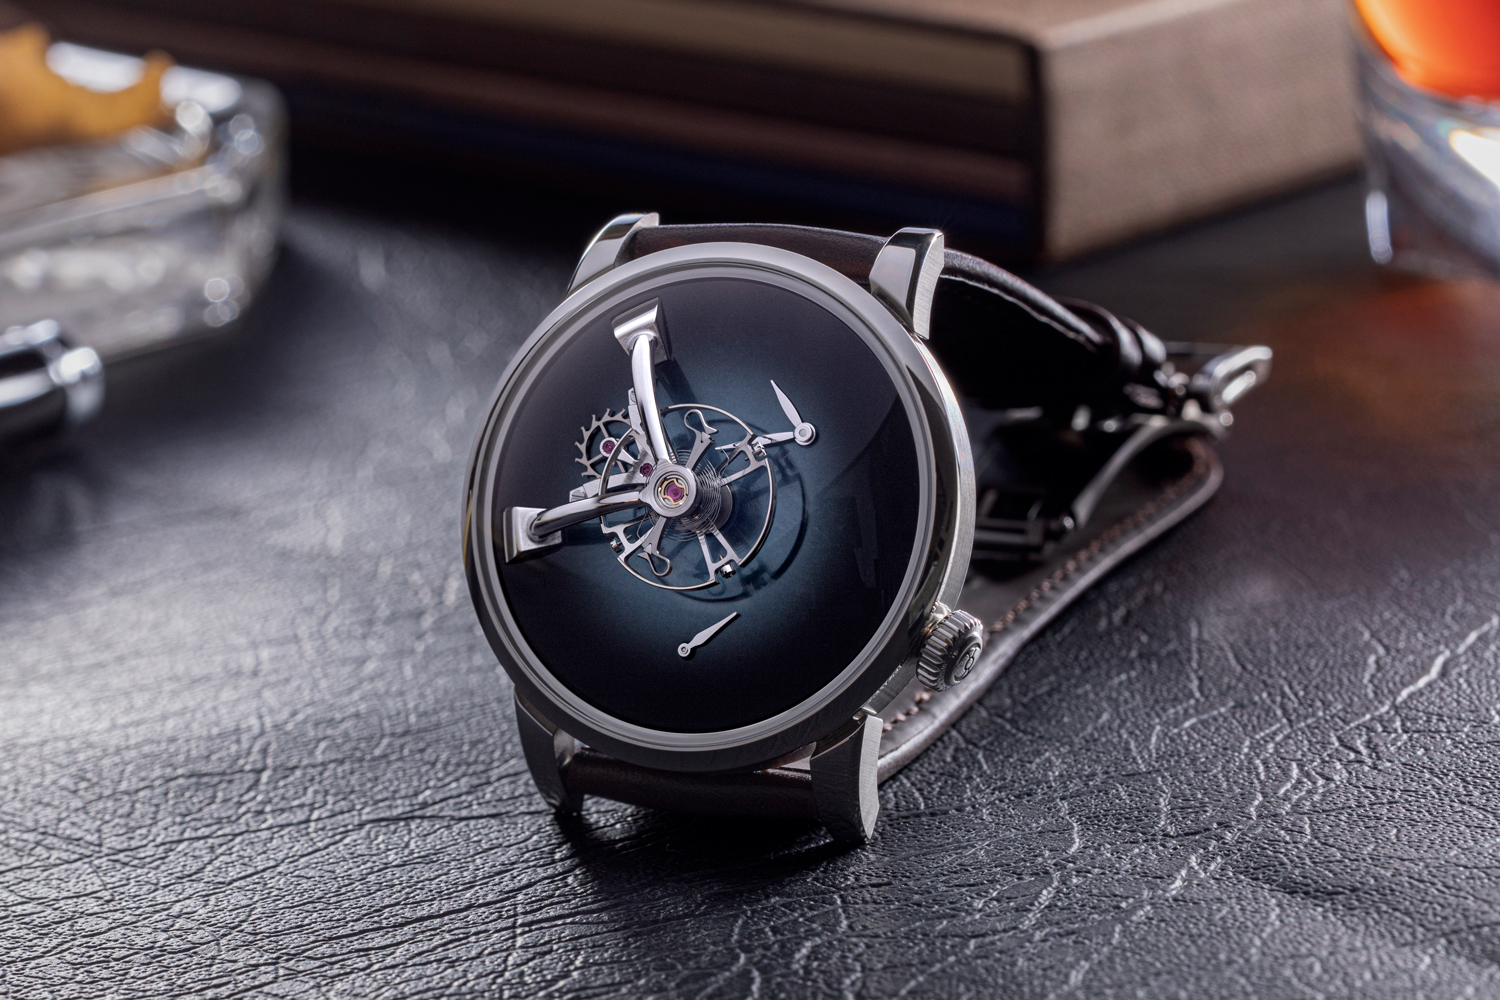 The LM101 MB&F x H. Moser, a collaboration between the two brands takes on H. Moser’s “back to basics” approach embodied in its Concept watch series with the MB&F logo omitted from the dial; the floating time and power reserve subdials have been removed, thanks to hands placed directly on the main dial, allowing to fully express the fumé dials borrowed from H. Moser & Cie; the watch is topped with a domed sapphire crystal, the cases for the LM101 MB&F x H. Mose were made of steel, which is unusual for MB&F (©Revolution)